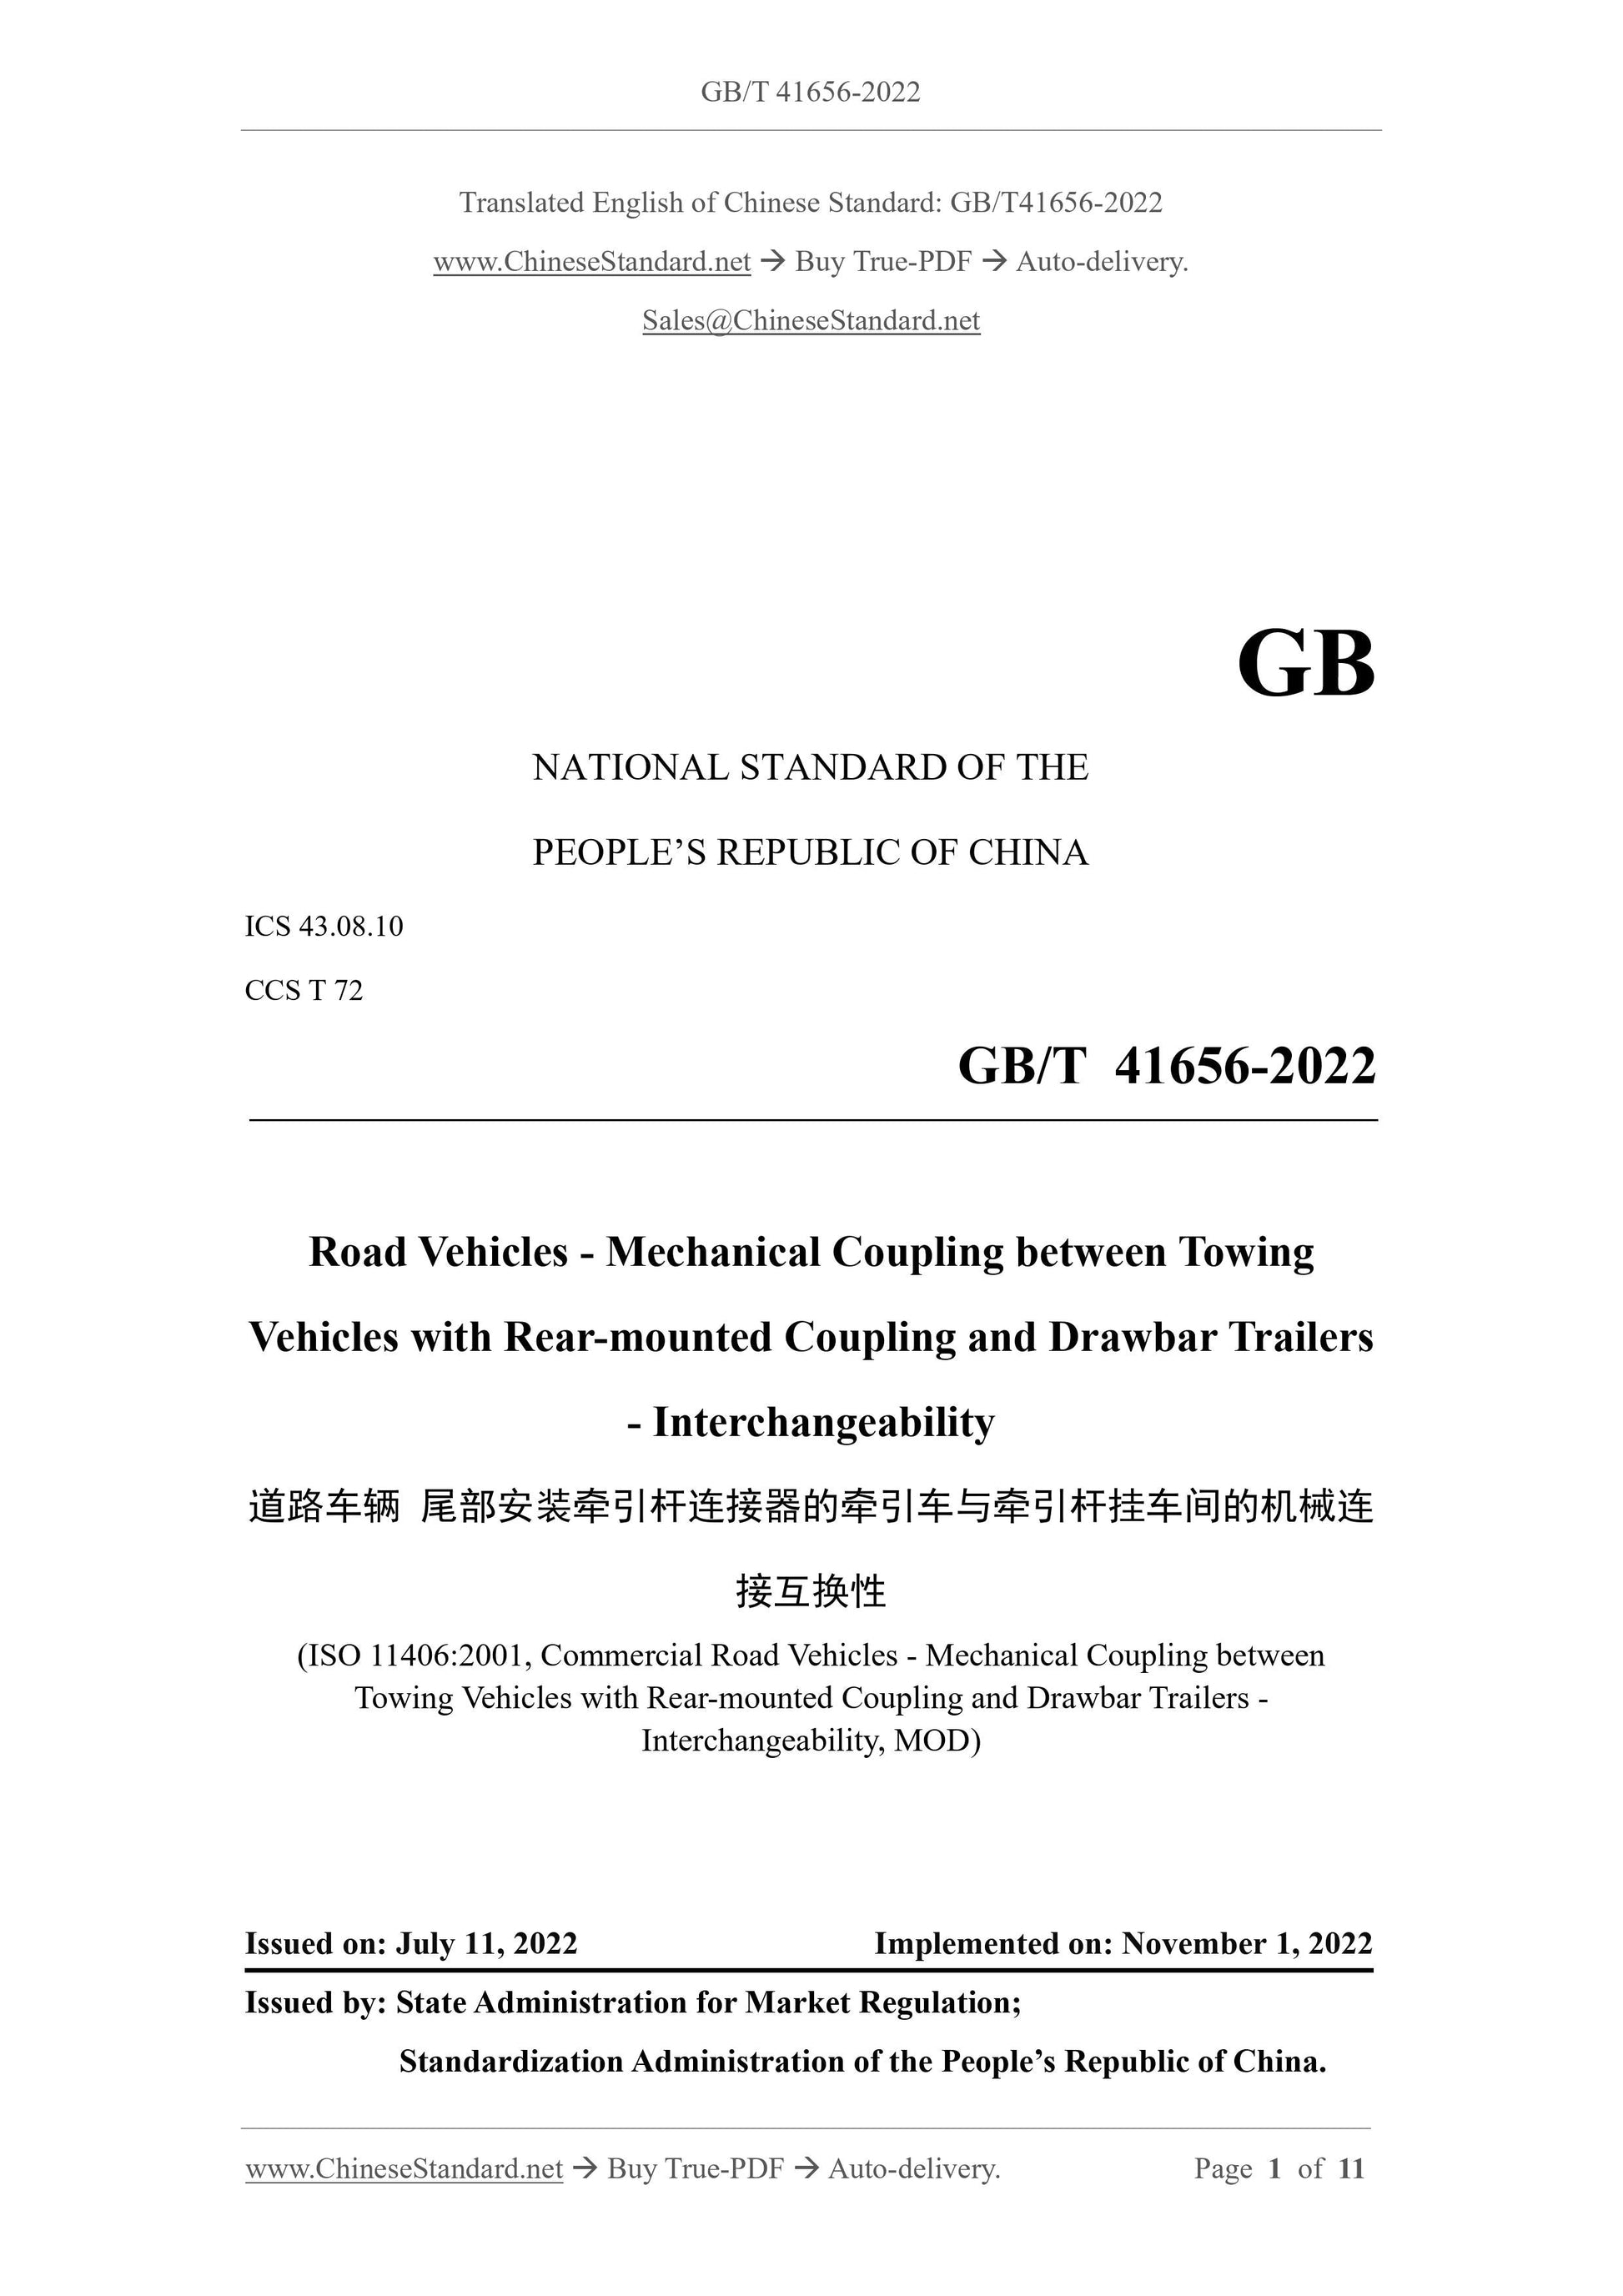 GB/T 41656-2022 Page 1